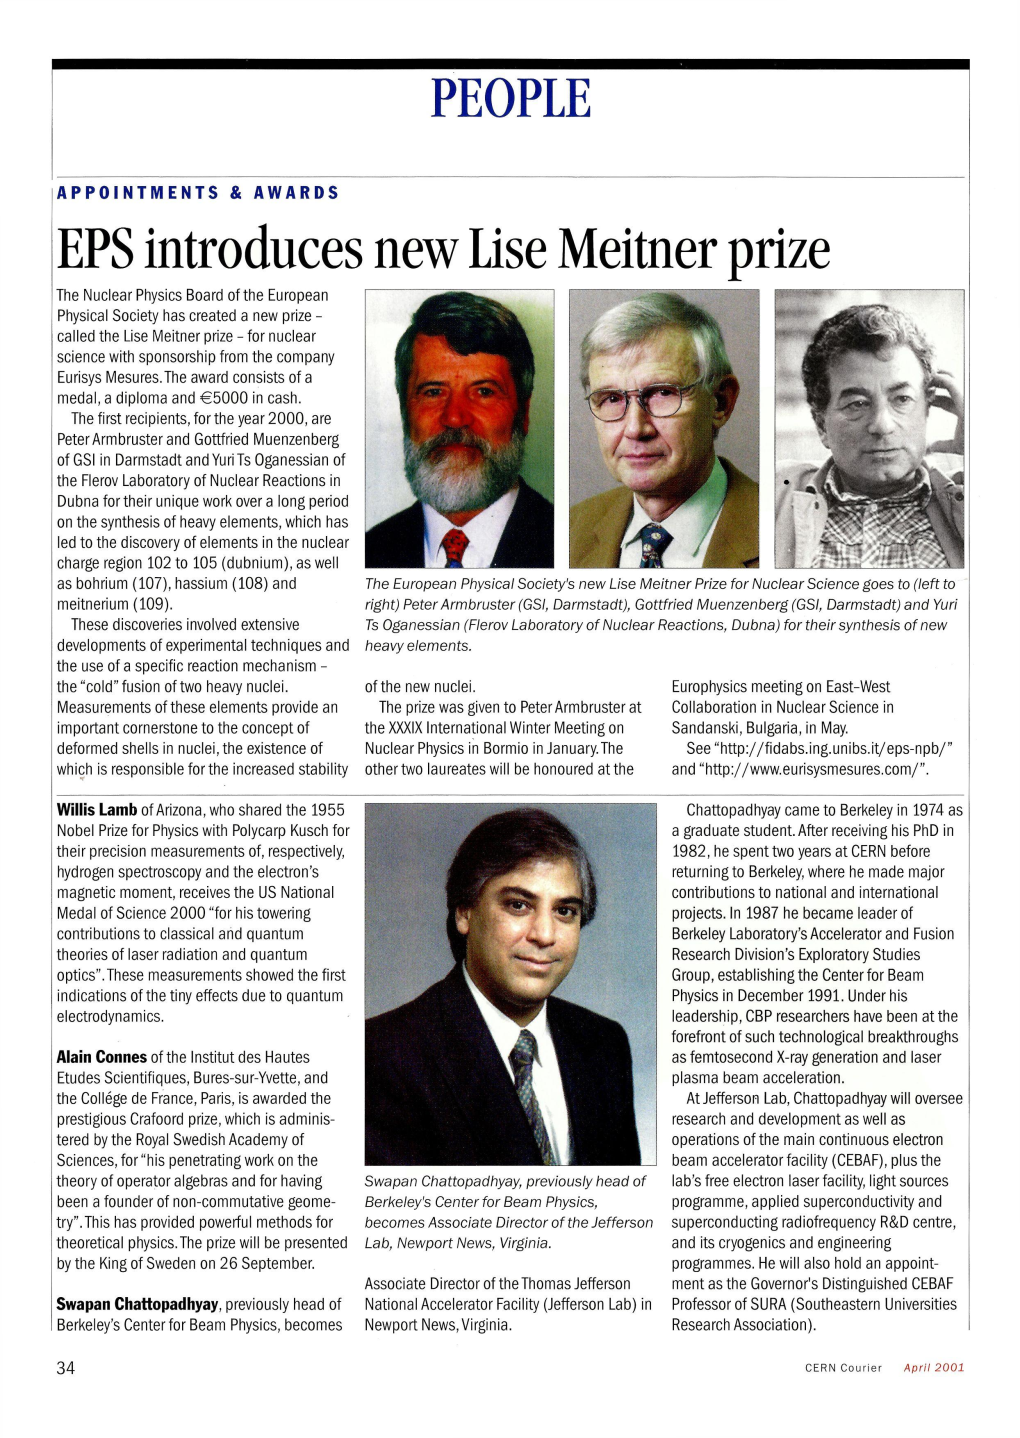 EPS Introduces New Lise Meitner Prize PEOPLE